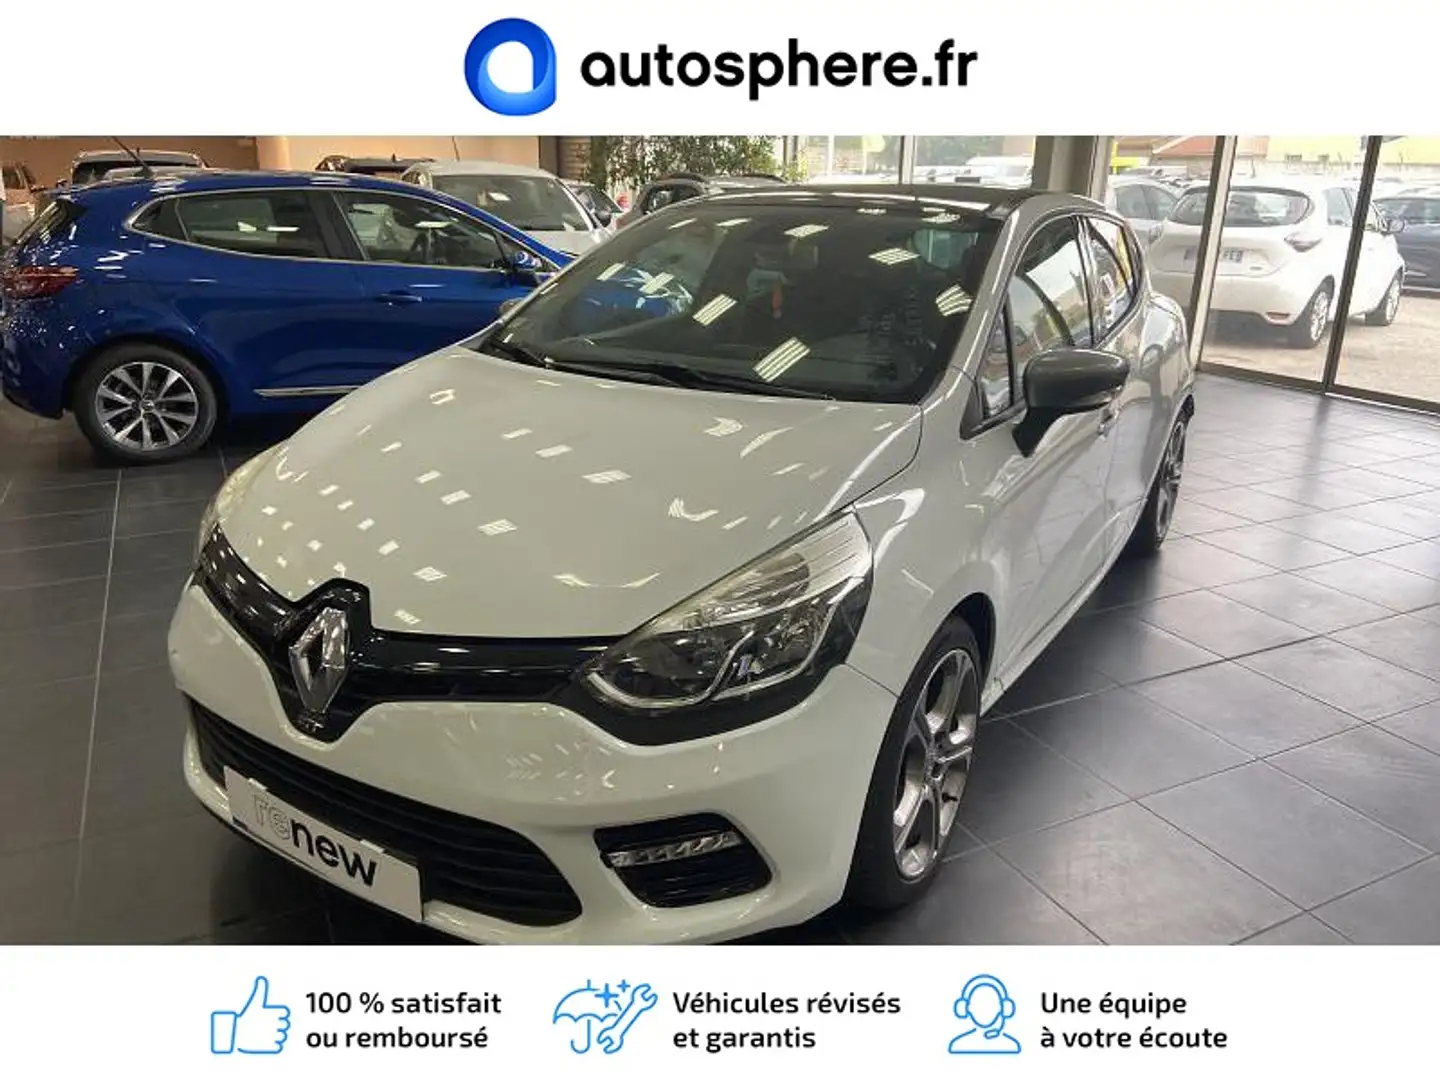 Renault Clio 1.2 TCe 120ch GT EDC eco² - 1